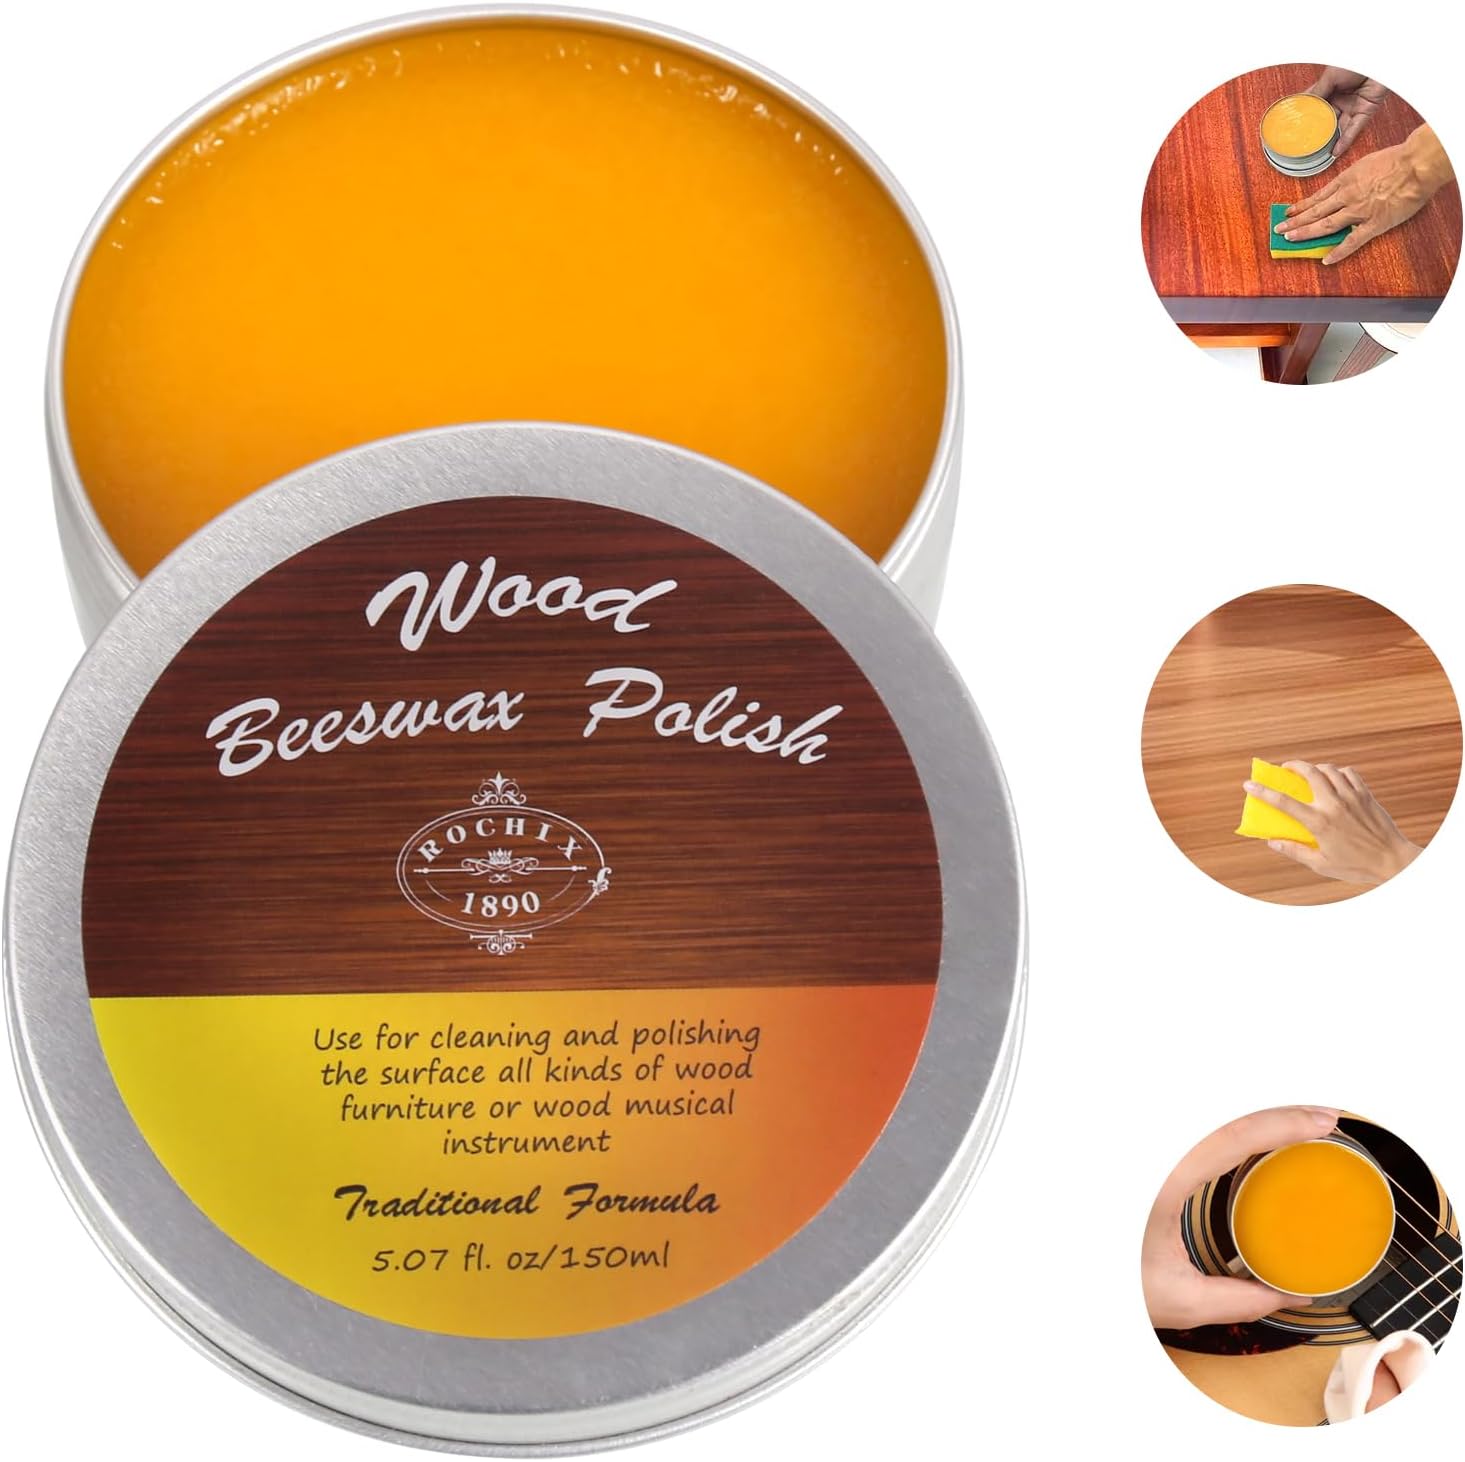 Wood Beeswax Furniture Polish Traditional Beeswax Polish for Wood Furniture, Floors,Wood Doors, Tables, Chairs to Protect & Care,5.07 fl.oz/150ml